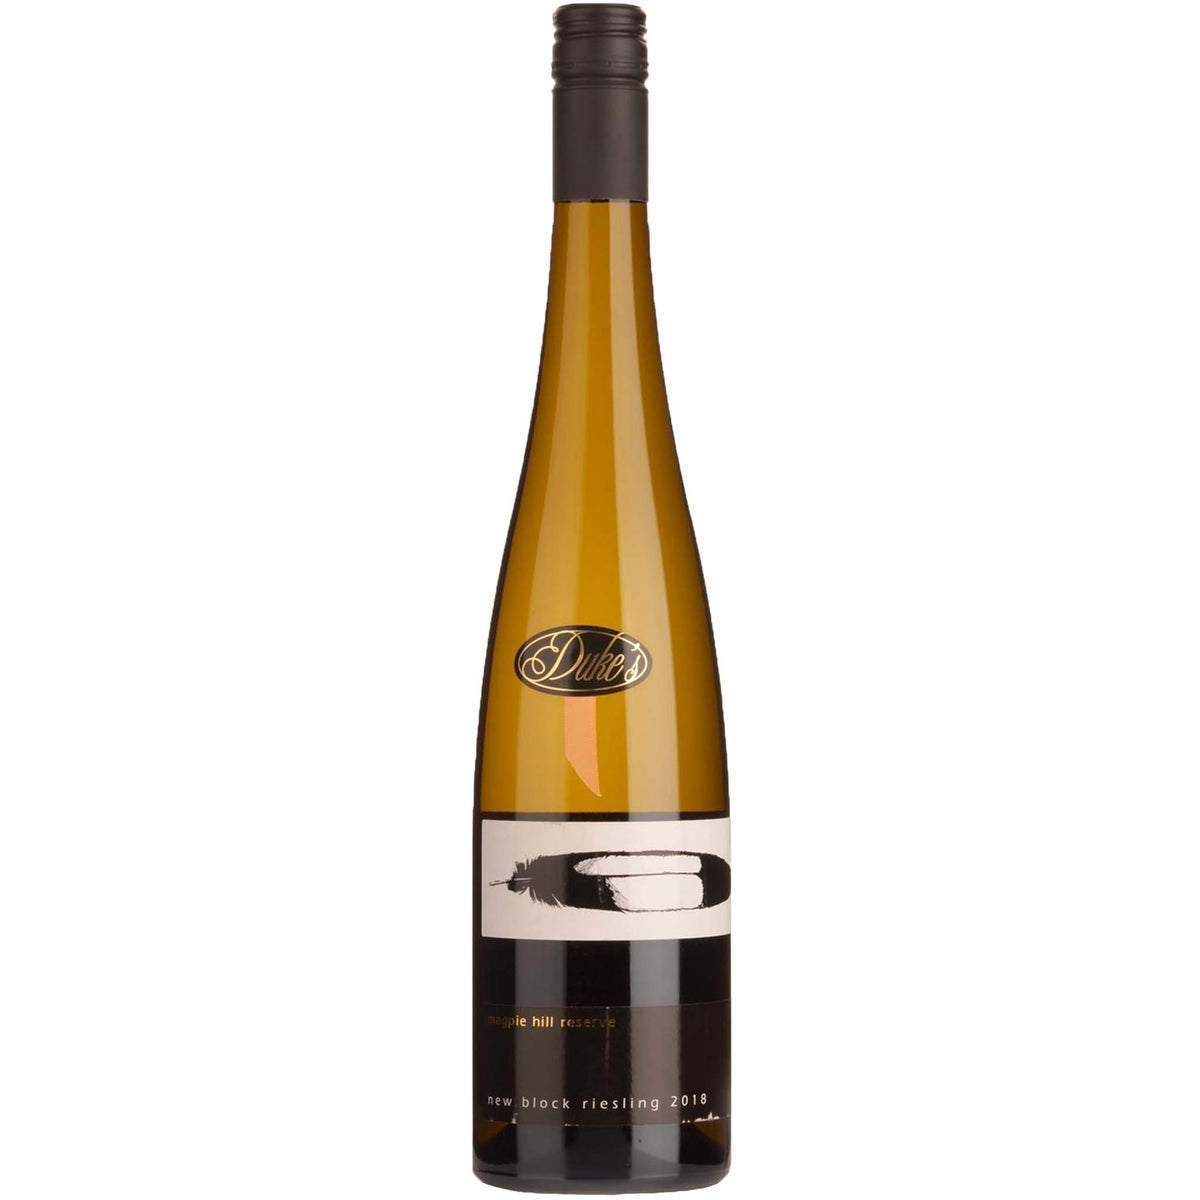 dukes-magpie-hill-reserve-new-block-riesling-2018